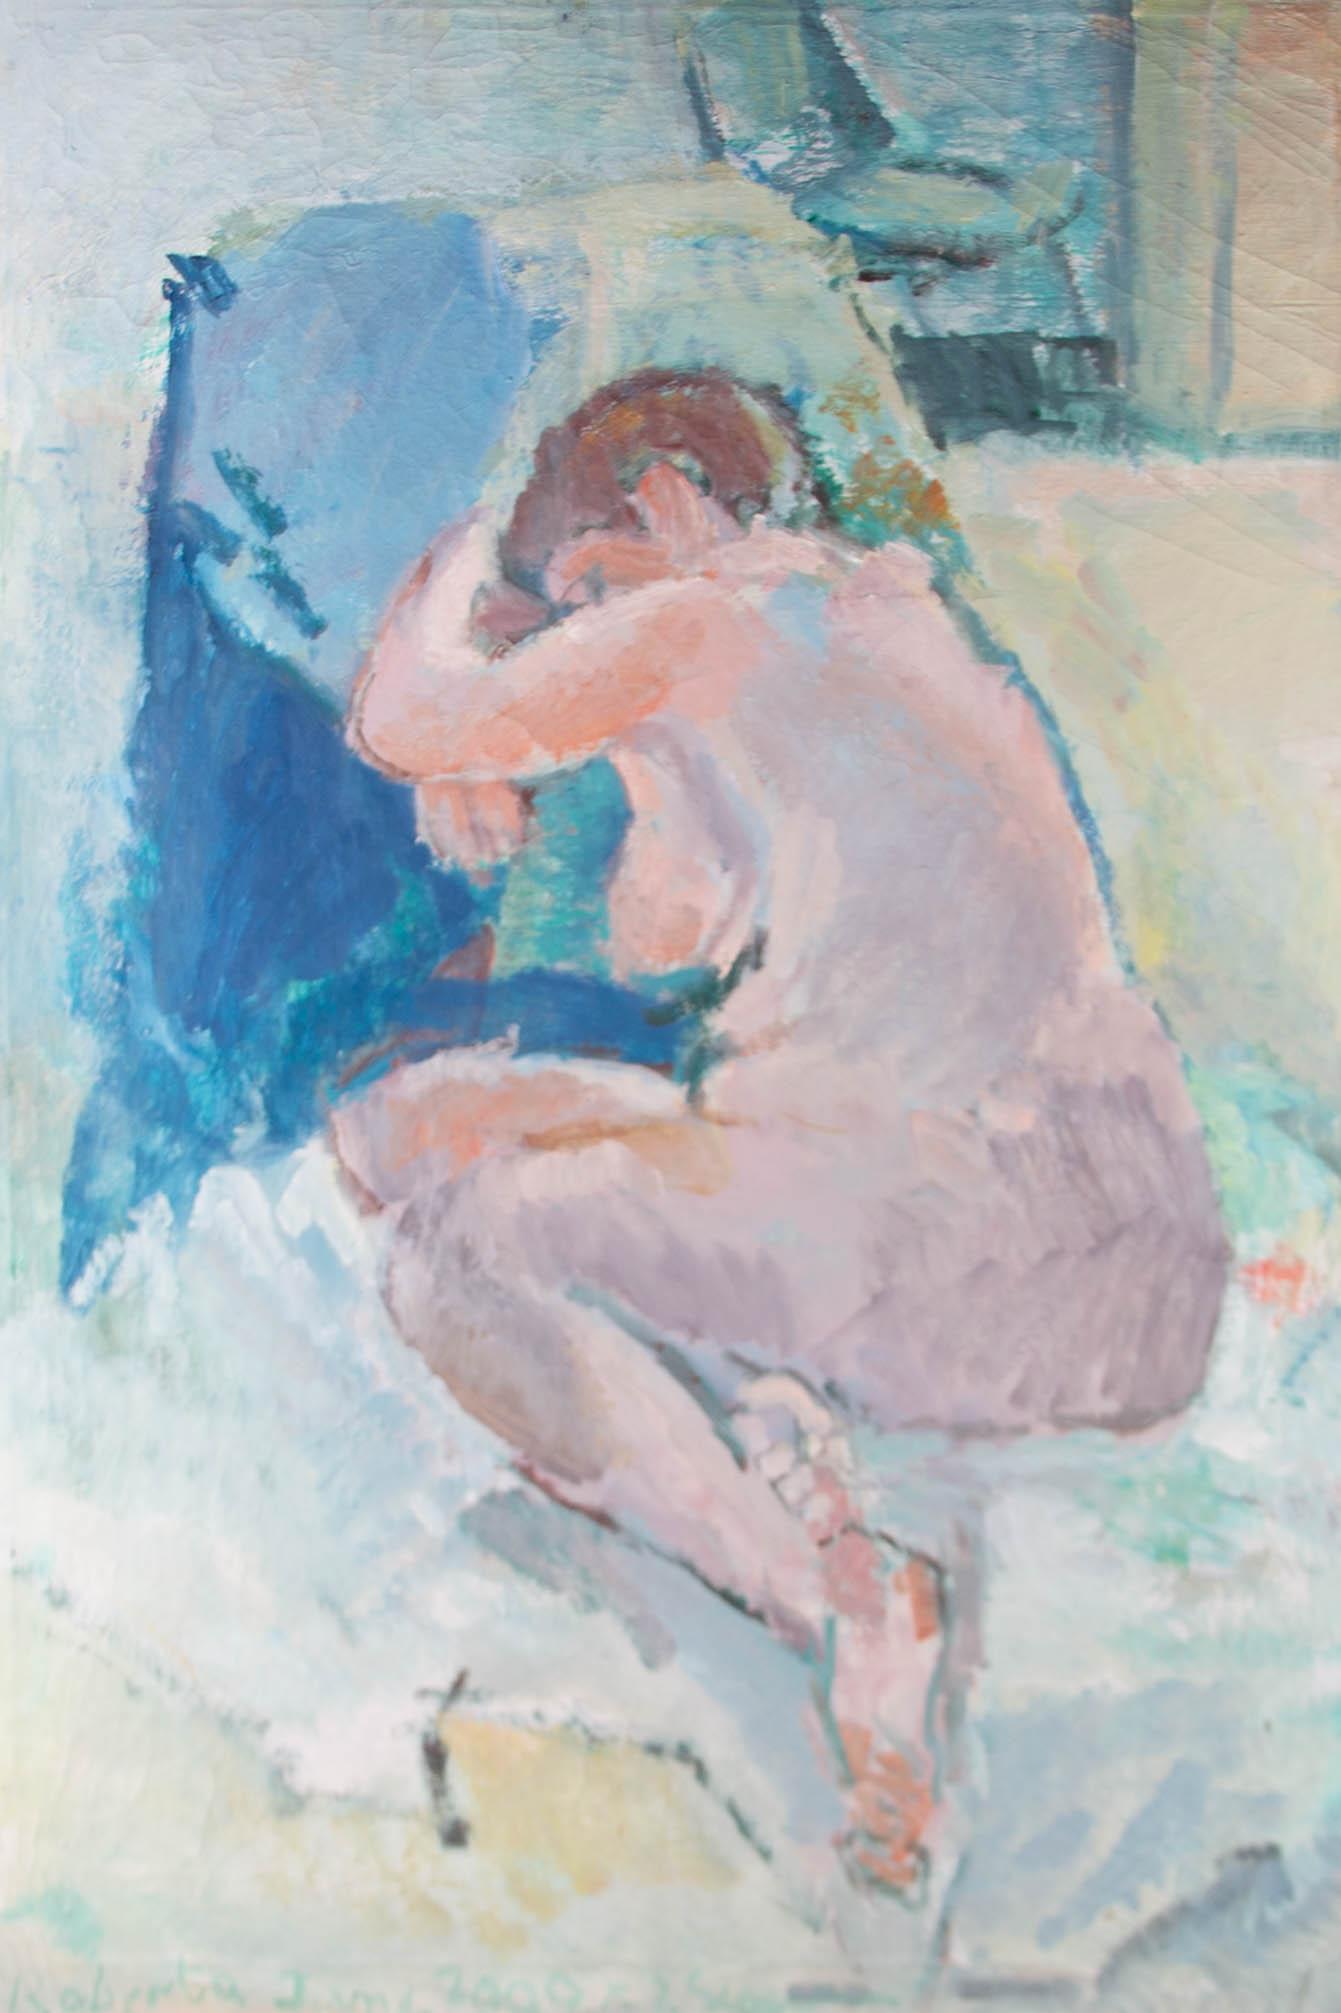 Lewis is known for using techniques that capture a multitude of painterly qualities, and this standout painting exemplifies these traits. Pale blue washes are coupled with stiff brush marks, capturing a brilliantly expressive portrayal of a sleeping